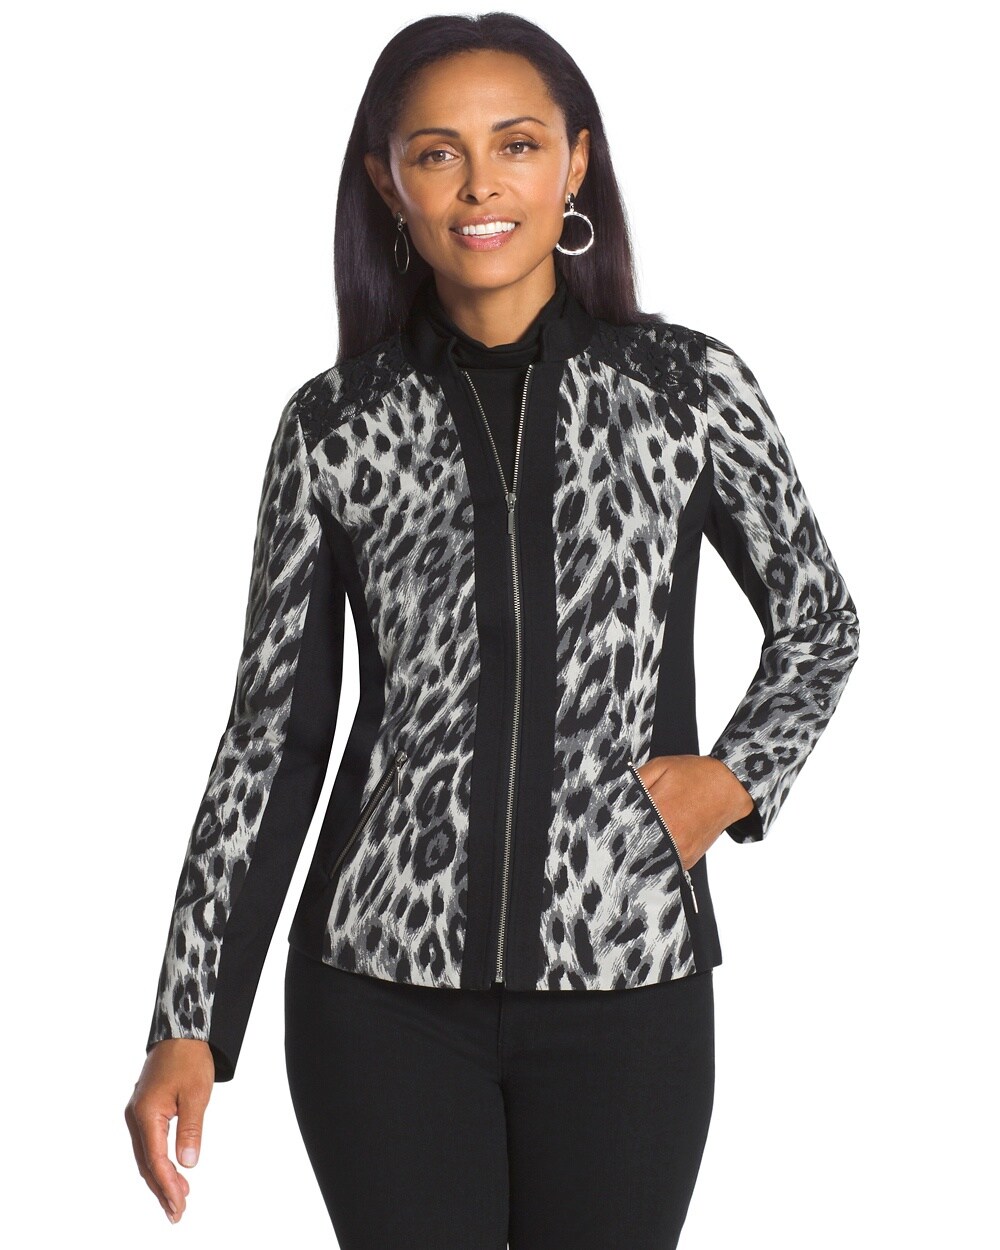 Jacquard Leopard and Lace Jacket